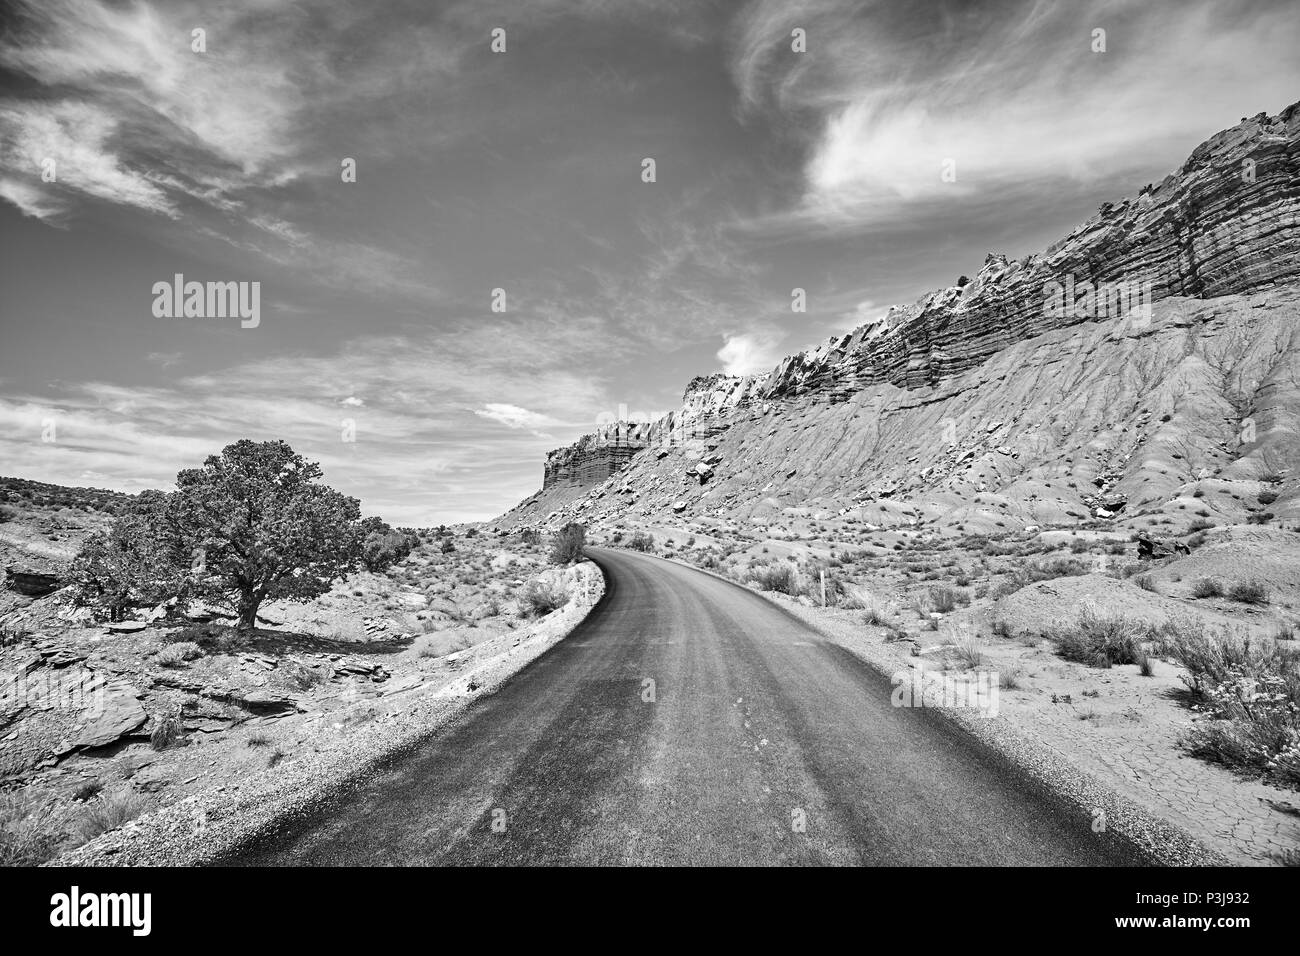 Black and white picture of a picturesque road, Capitol Reef National Park, Utah, USA. Stock Photo